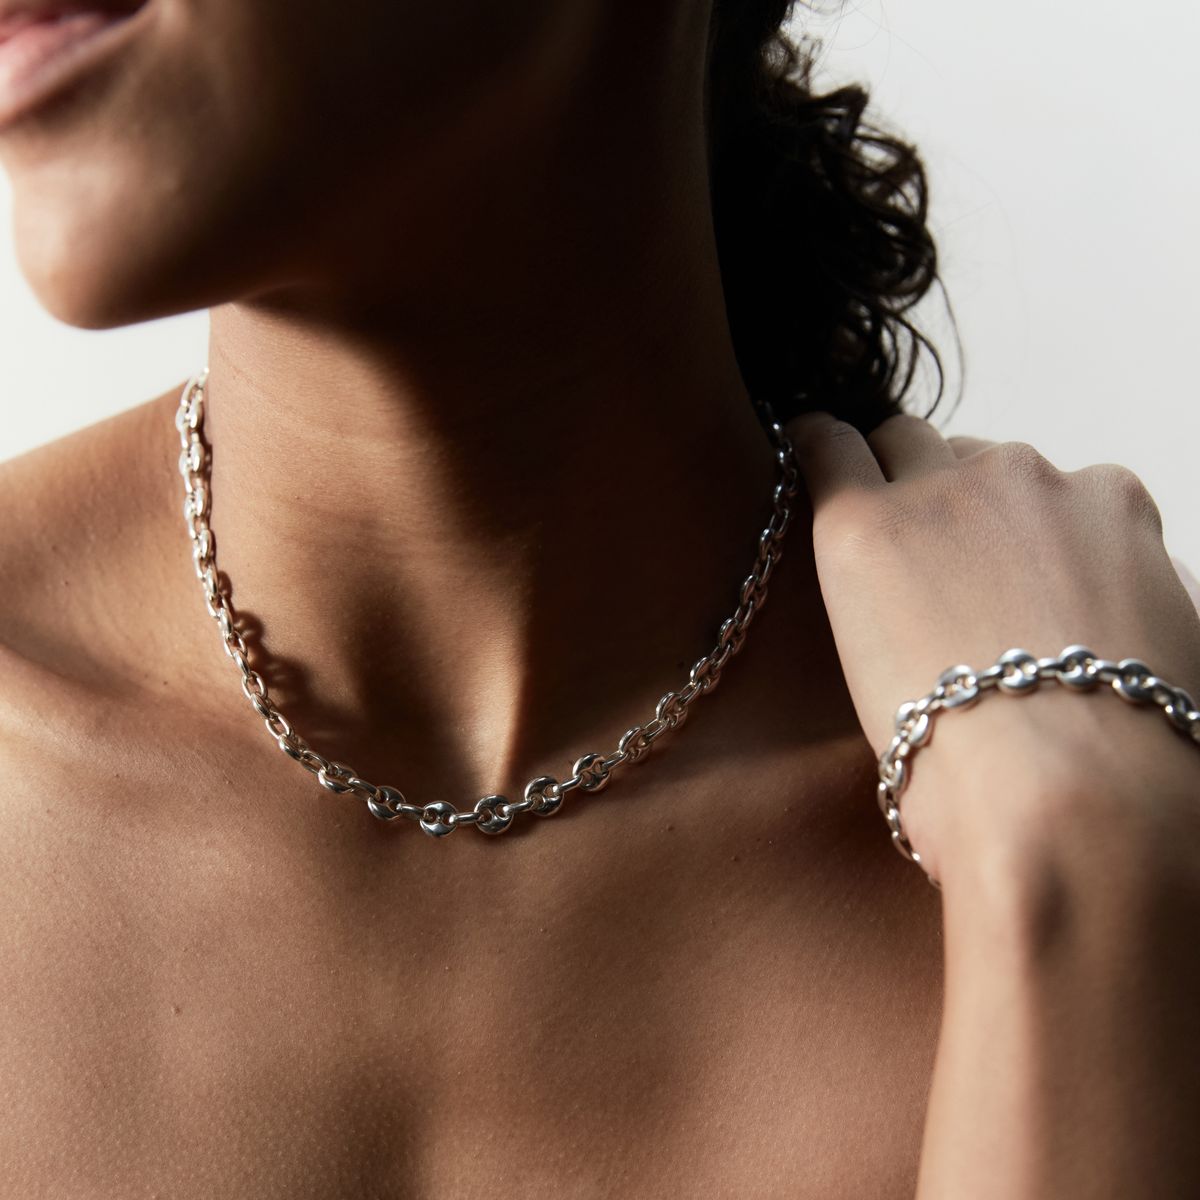 The 5 Best Pieces of Smart Jewelry You Can Buy